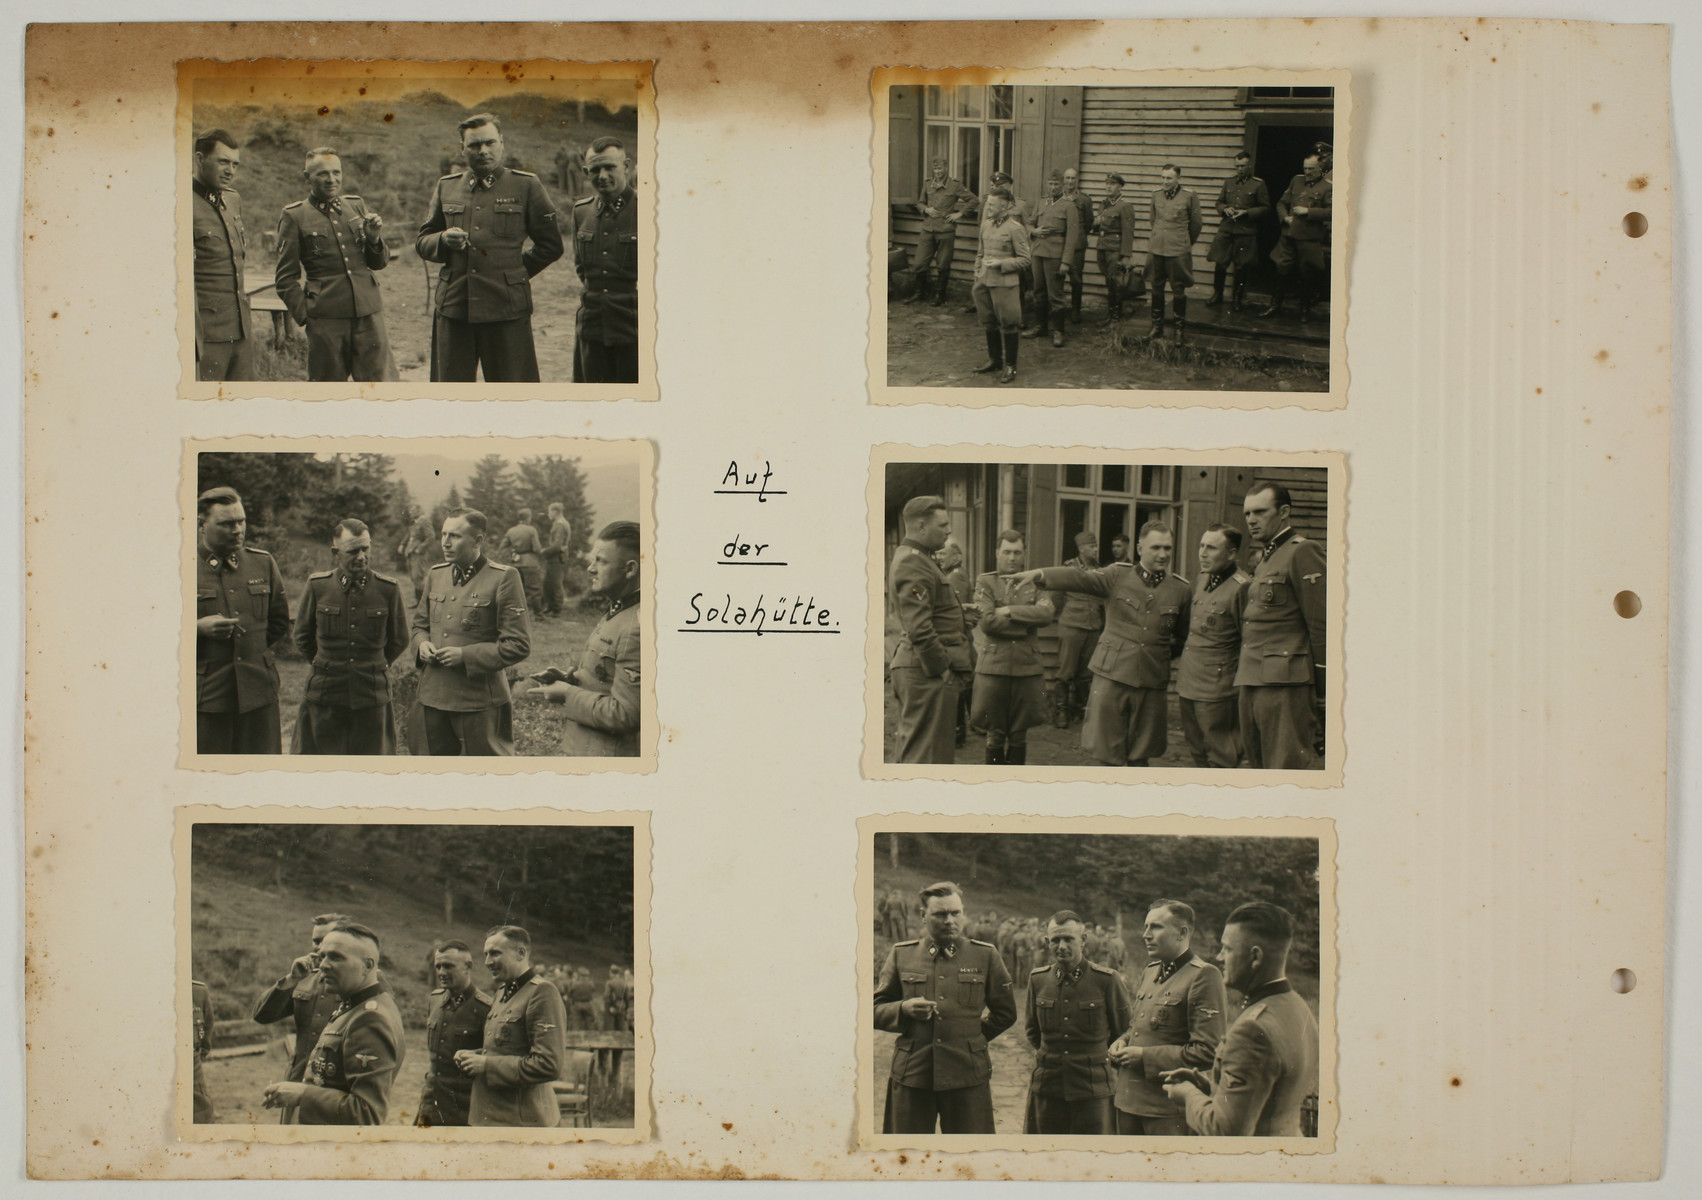 One page from an album created by adjutant to the commandant Karl Hoecker, depicting SS activities in and around the Auschwitz concentration camp.

The original caption reads "At Solahuette.'